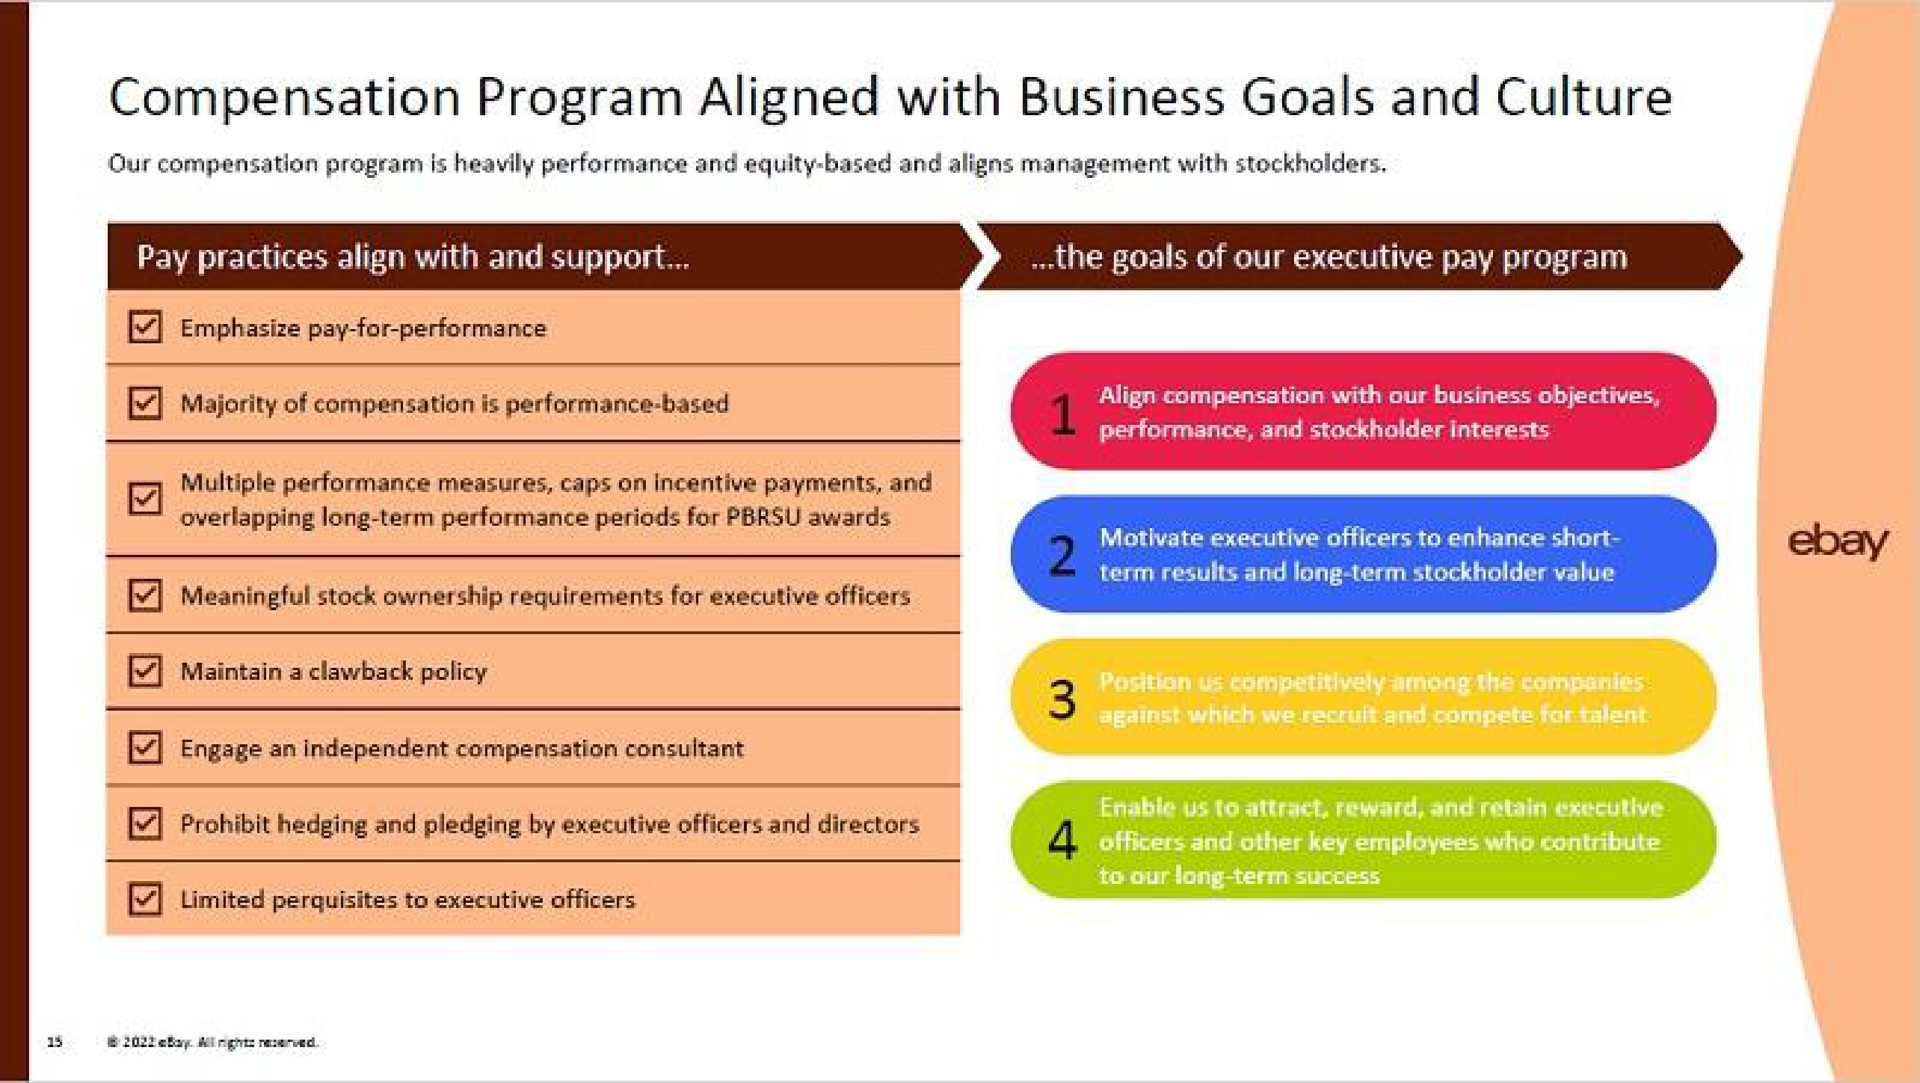 compensation program aligned with business goals and culture | eBay